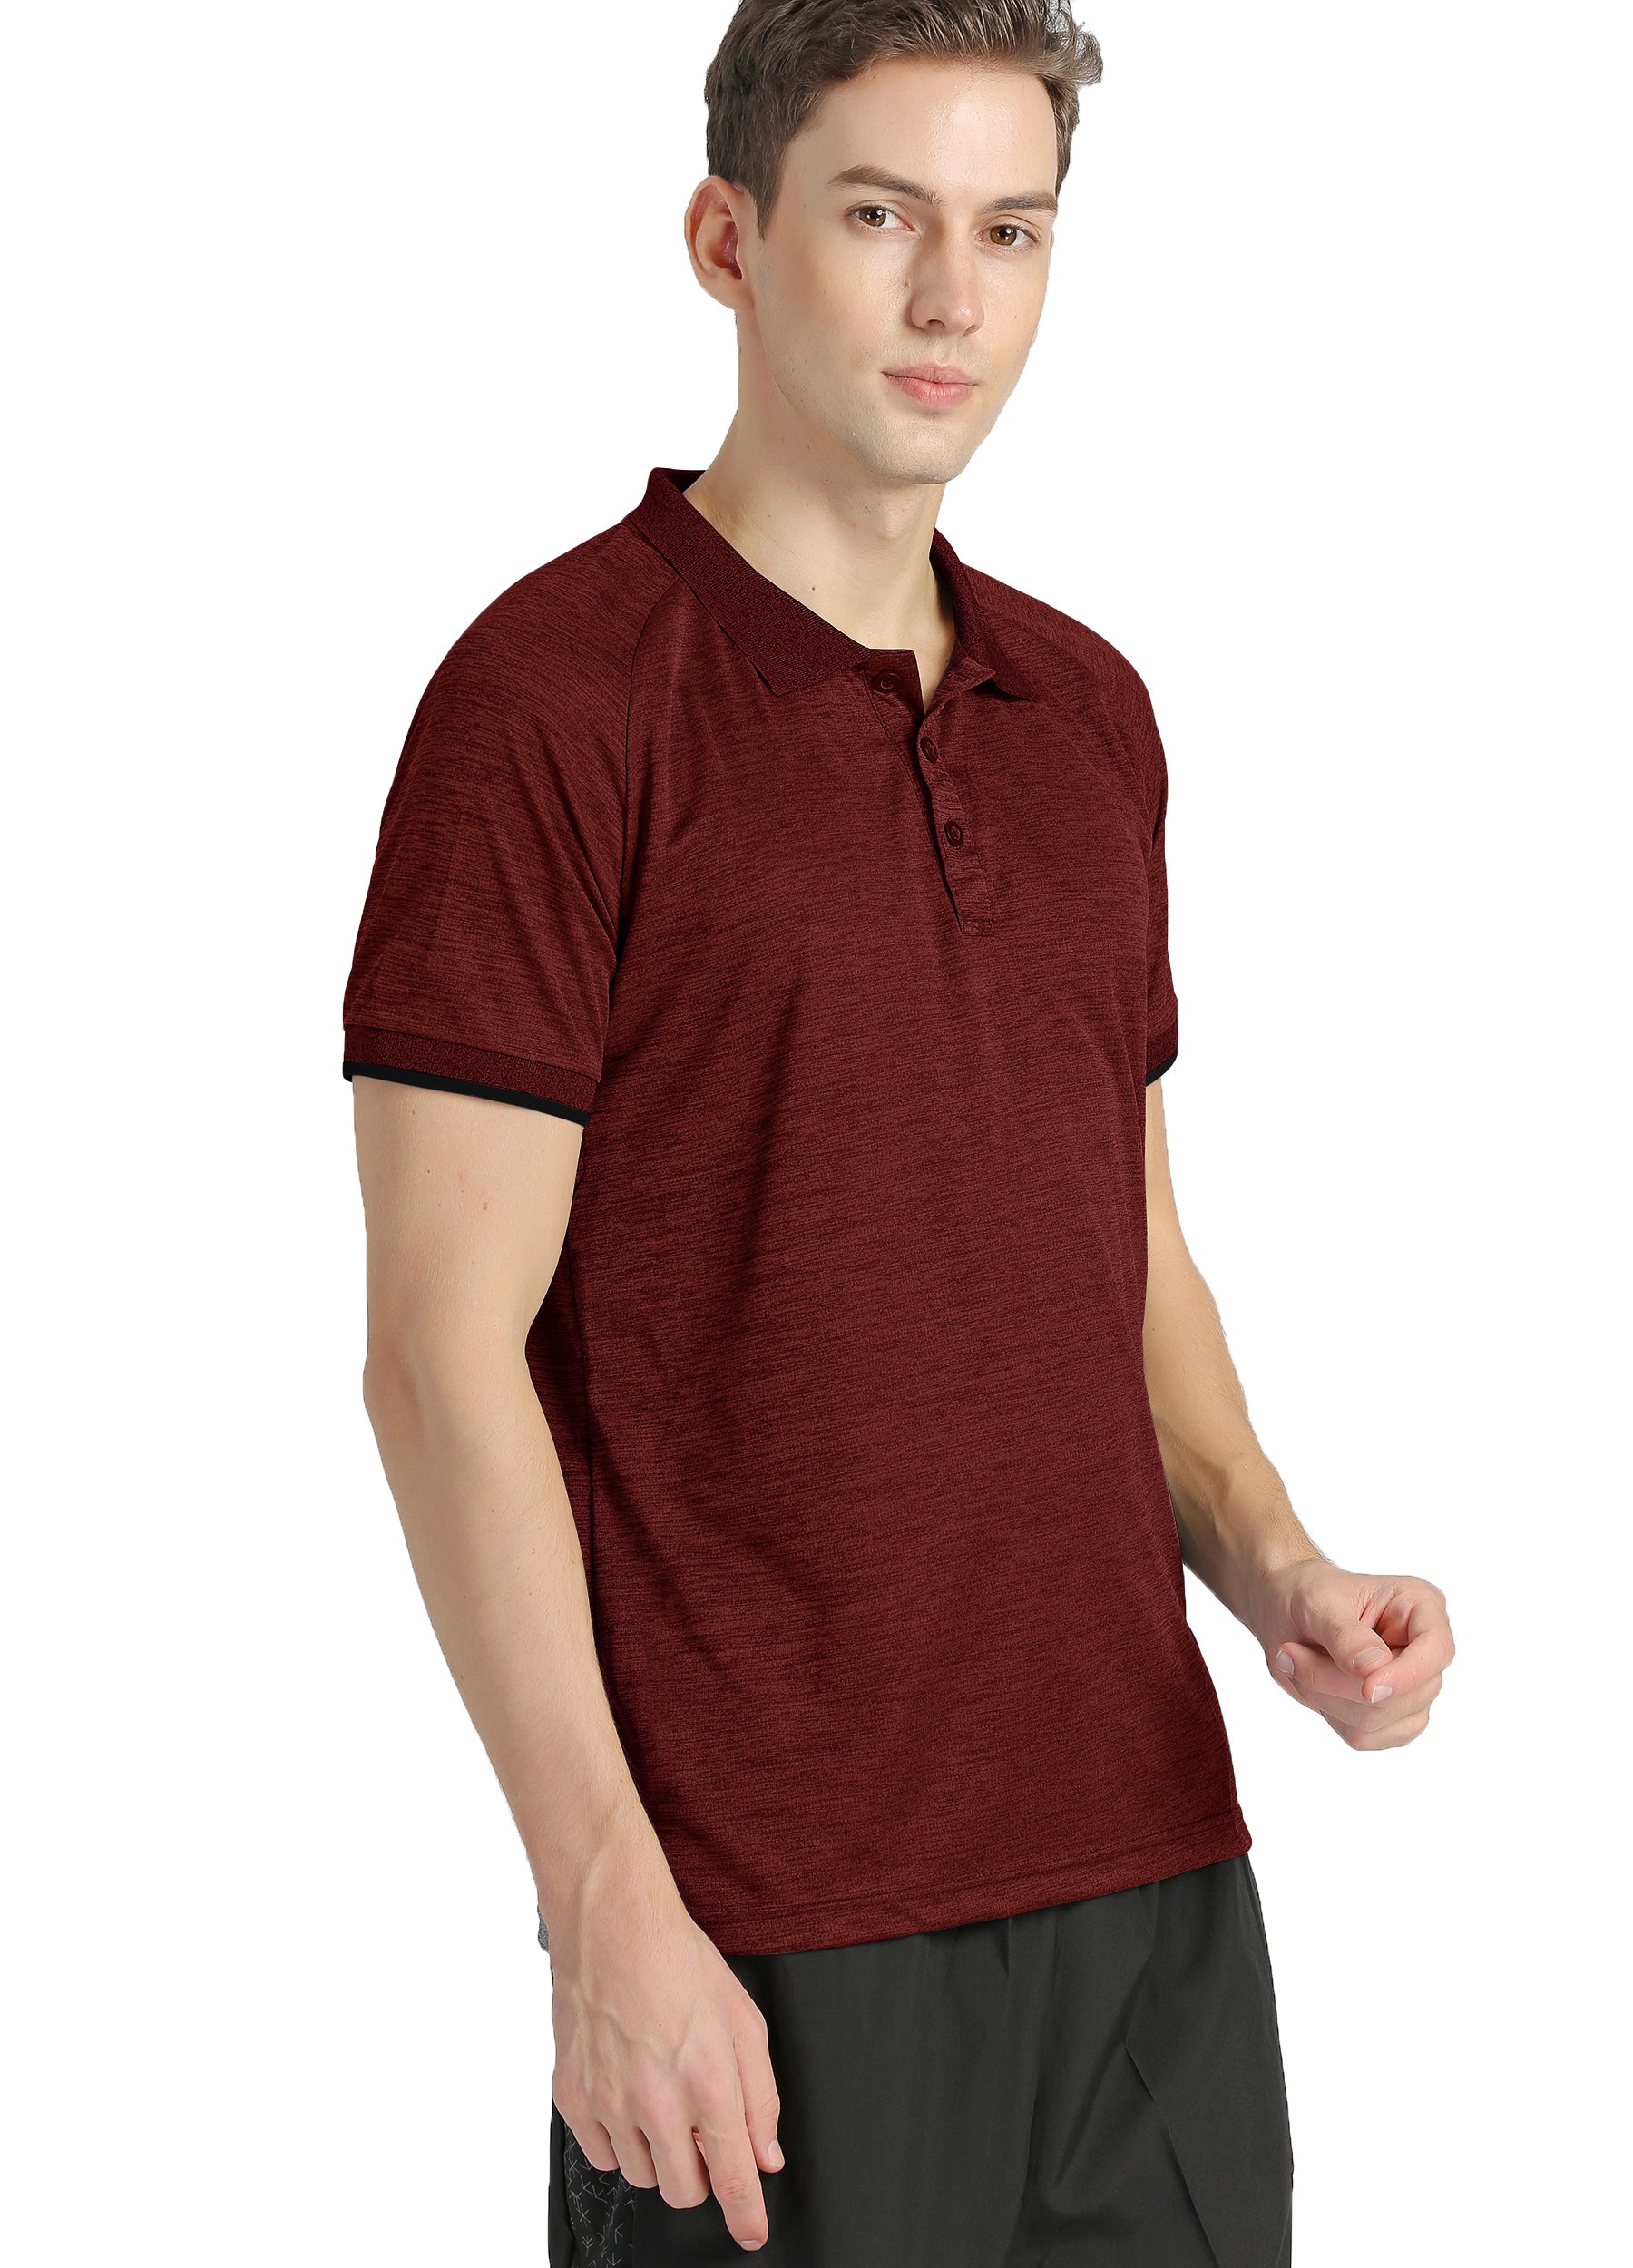 4POSE Men's Summer Quick Dry Stretch Polo Shirt-Dark red